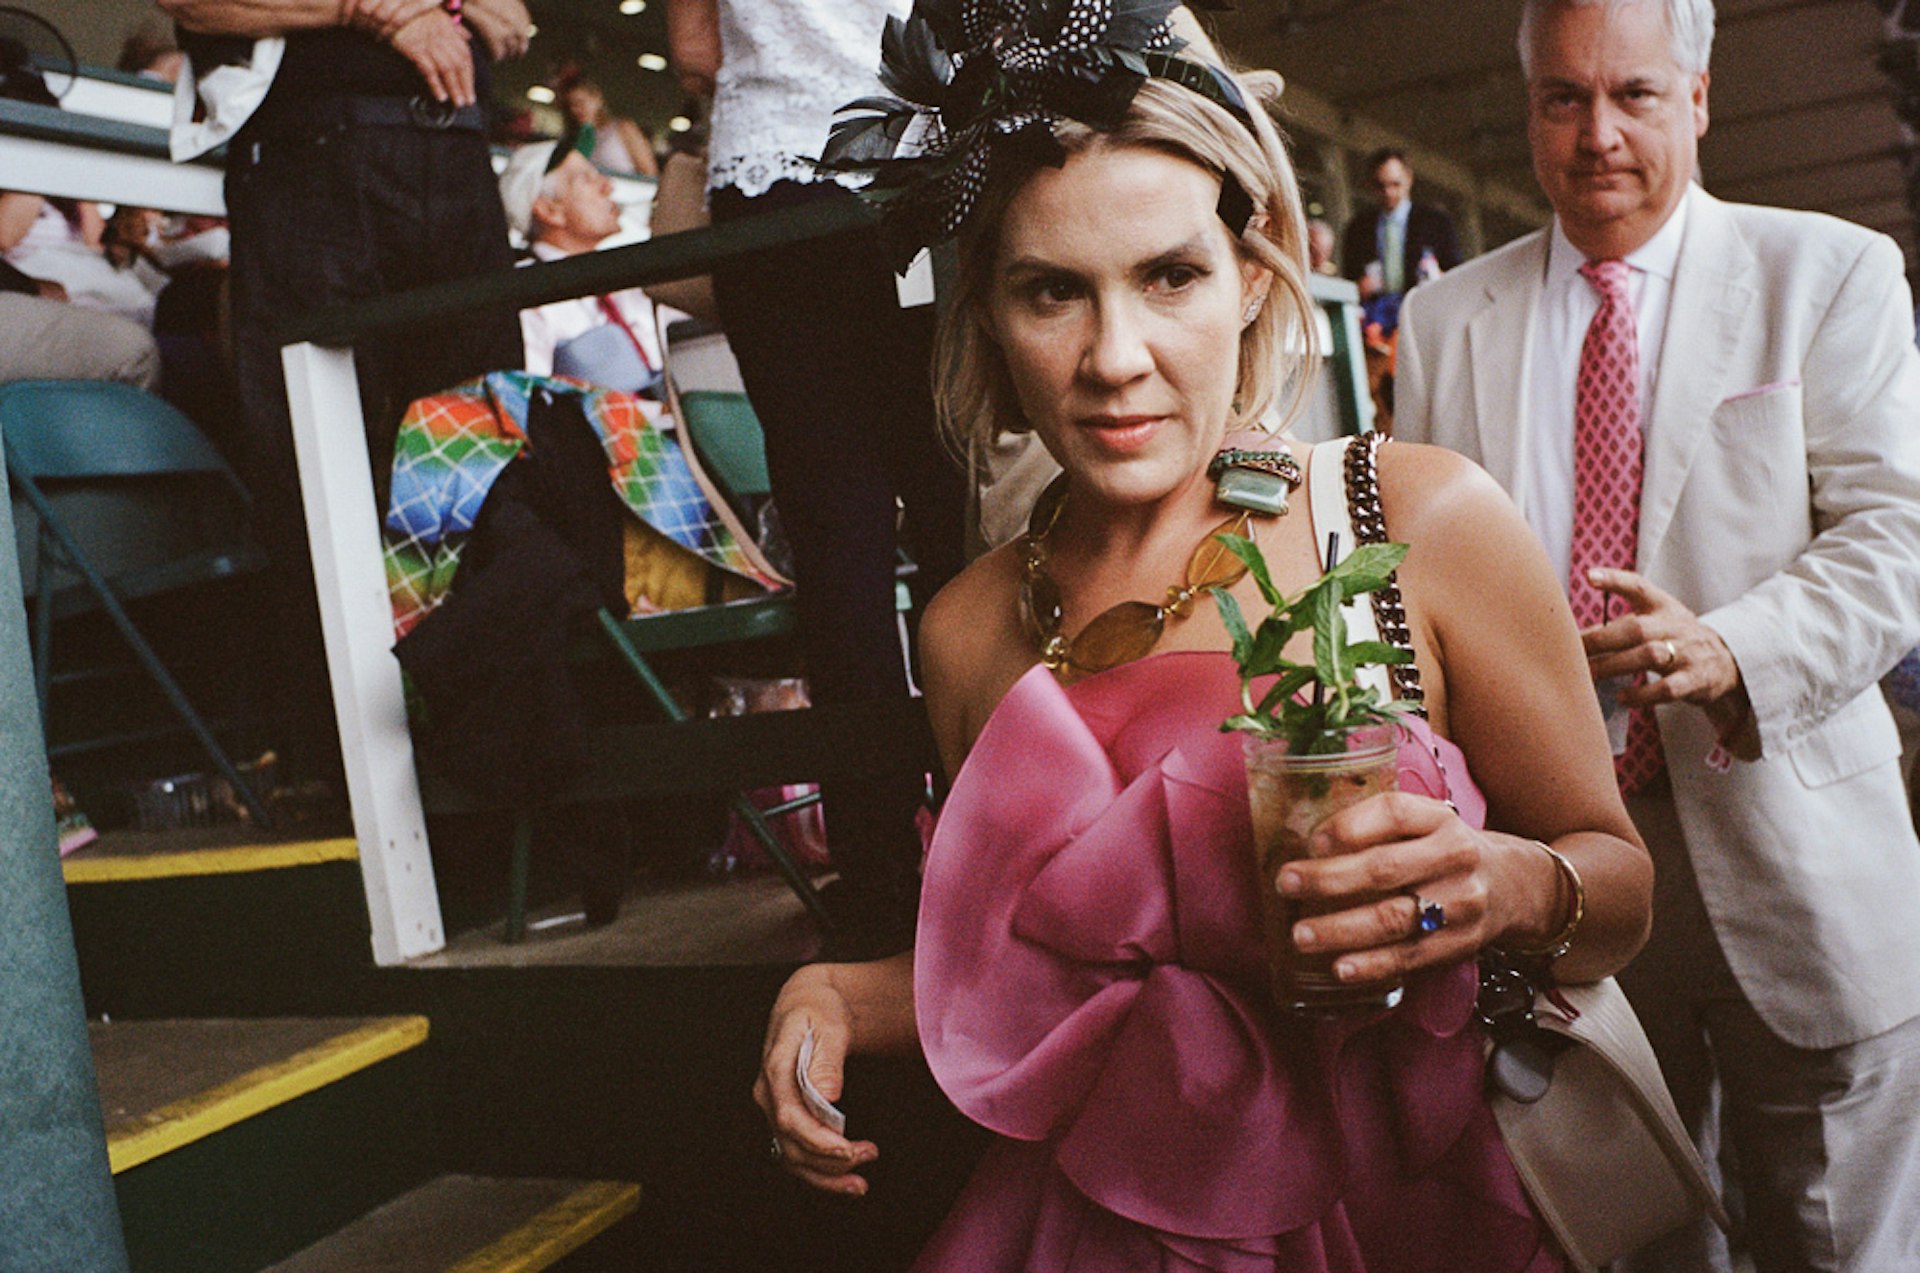 Decadence and depravity at the Kentucky Derby